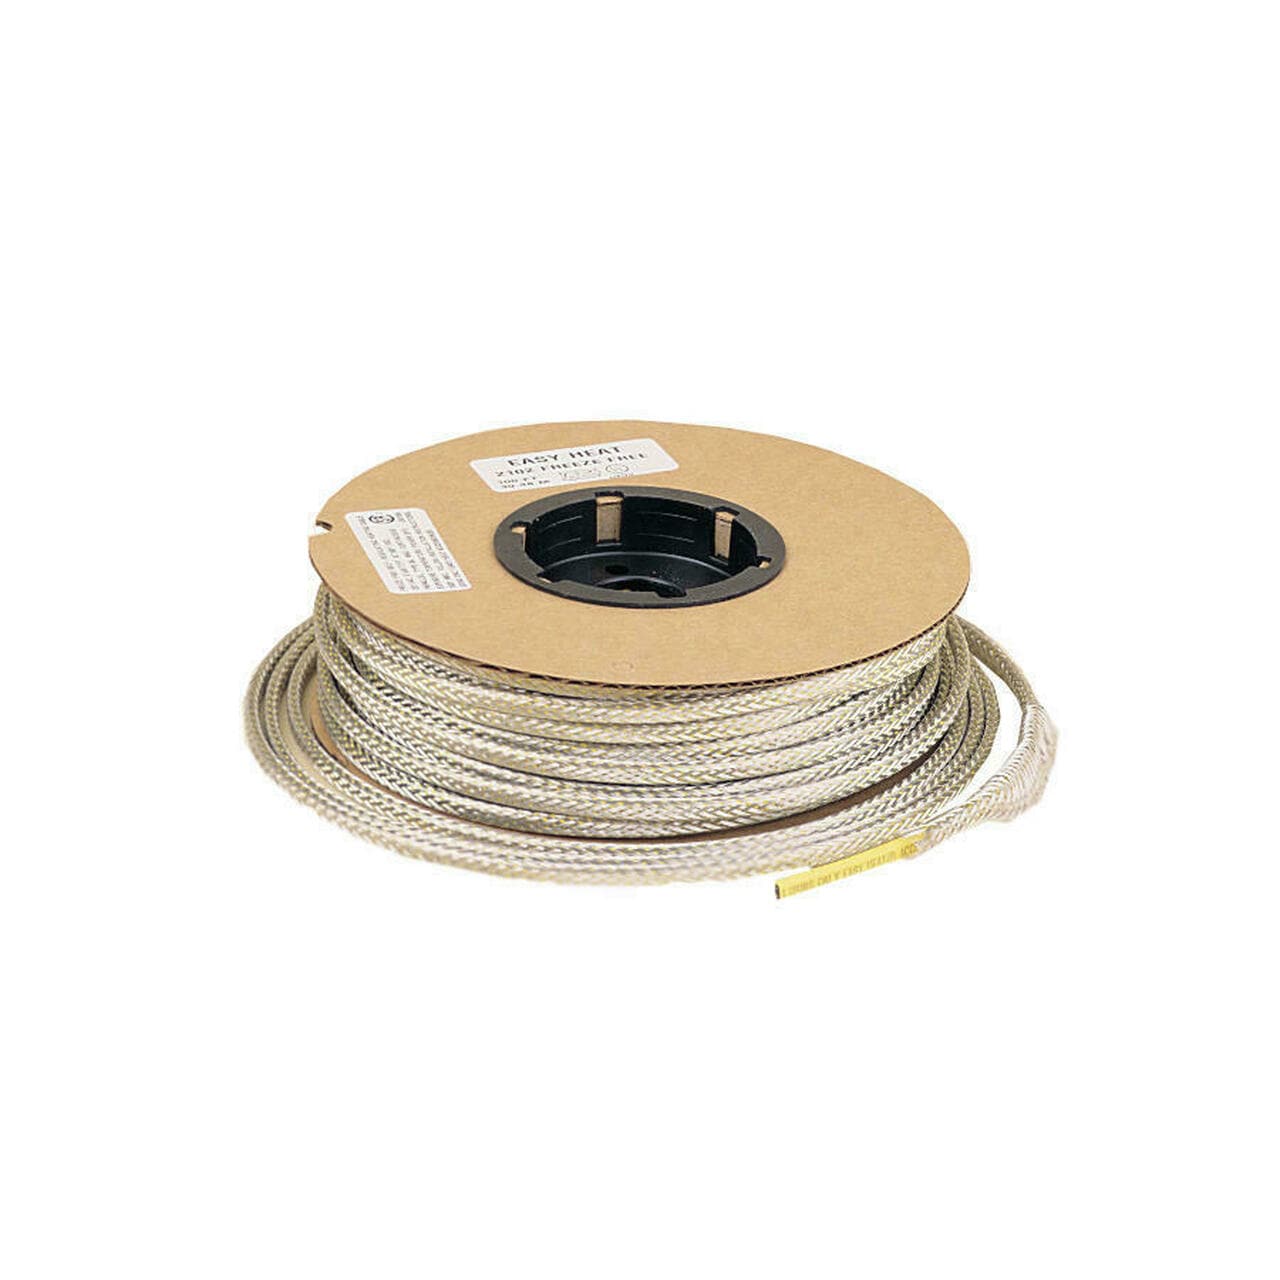 NEW EASY HEAT AHB-160 60 FOOT PIPE HEATING CABLE HEAT TAPE KIT SALE 6837207  13627109599